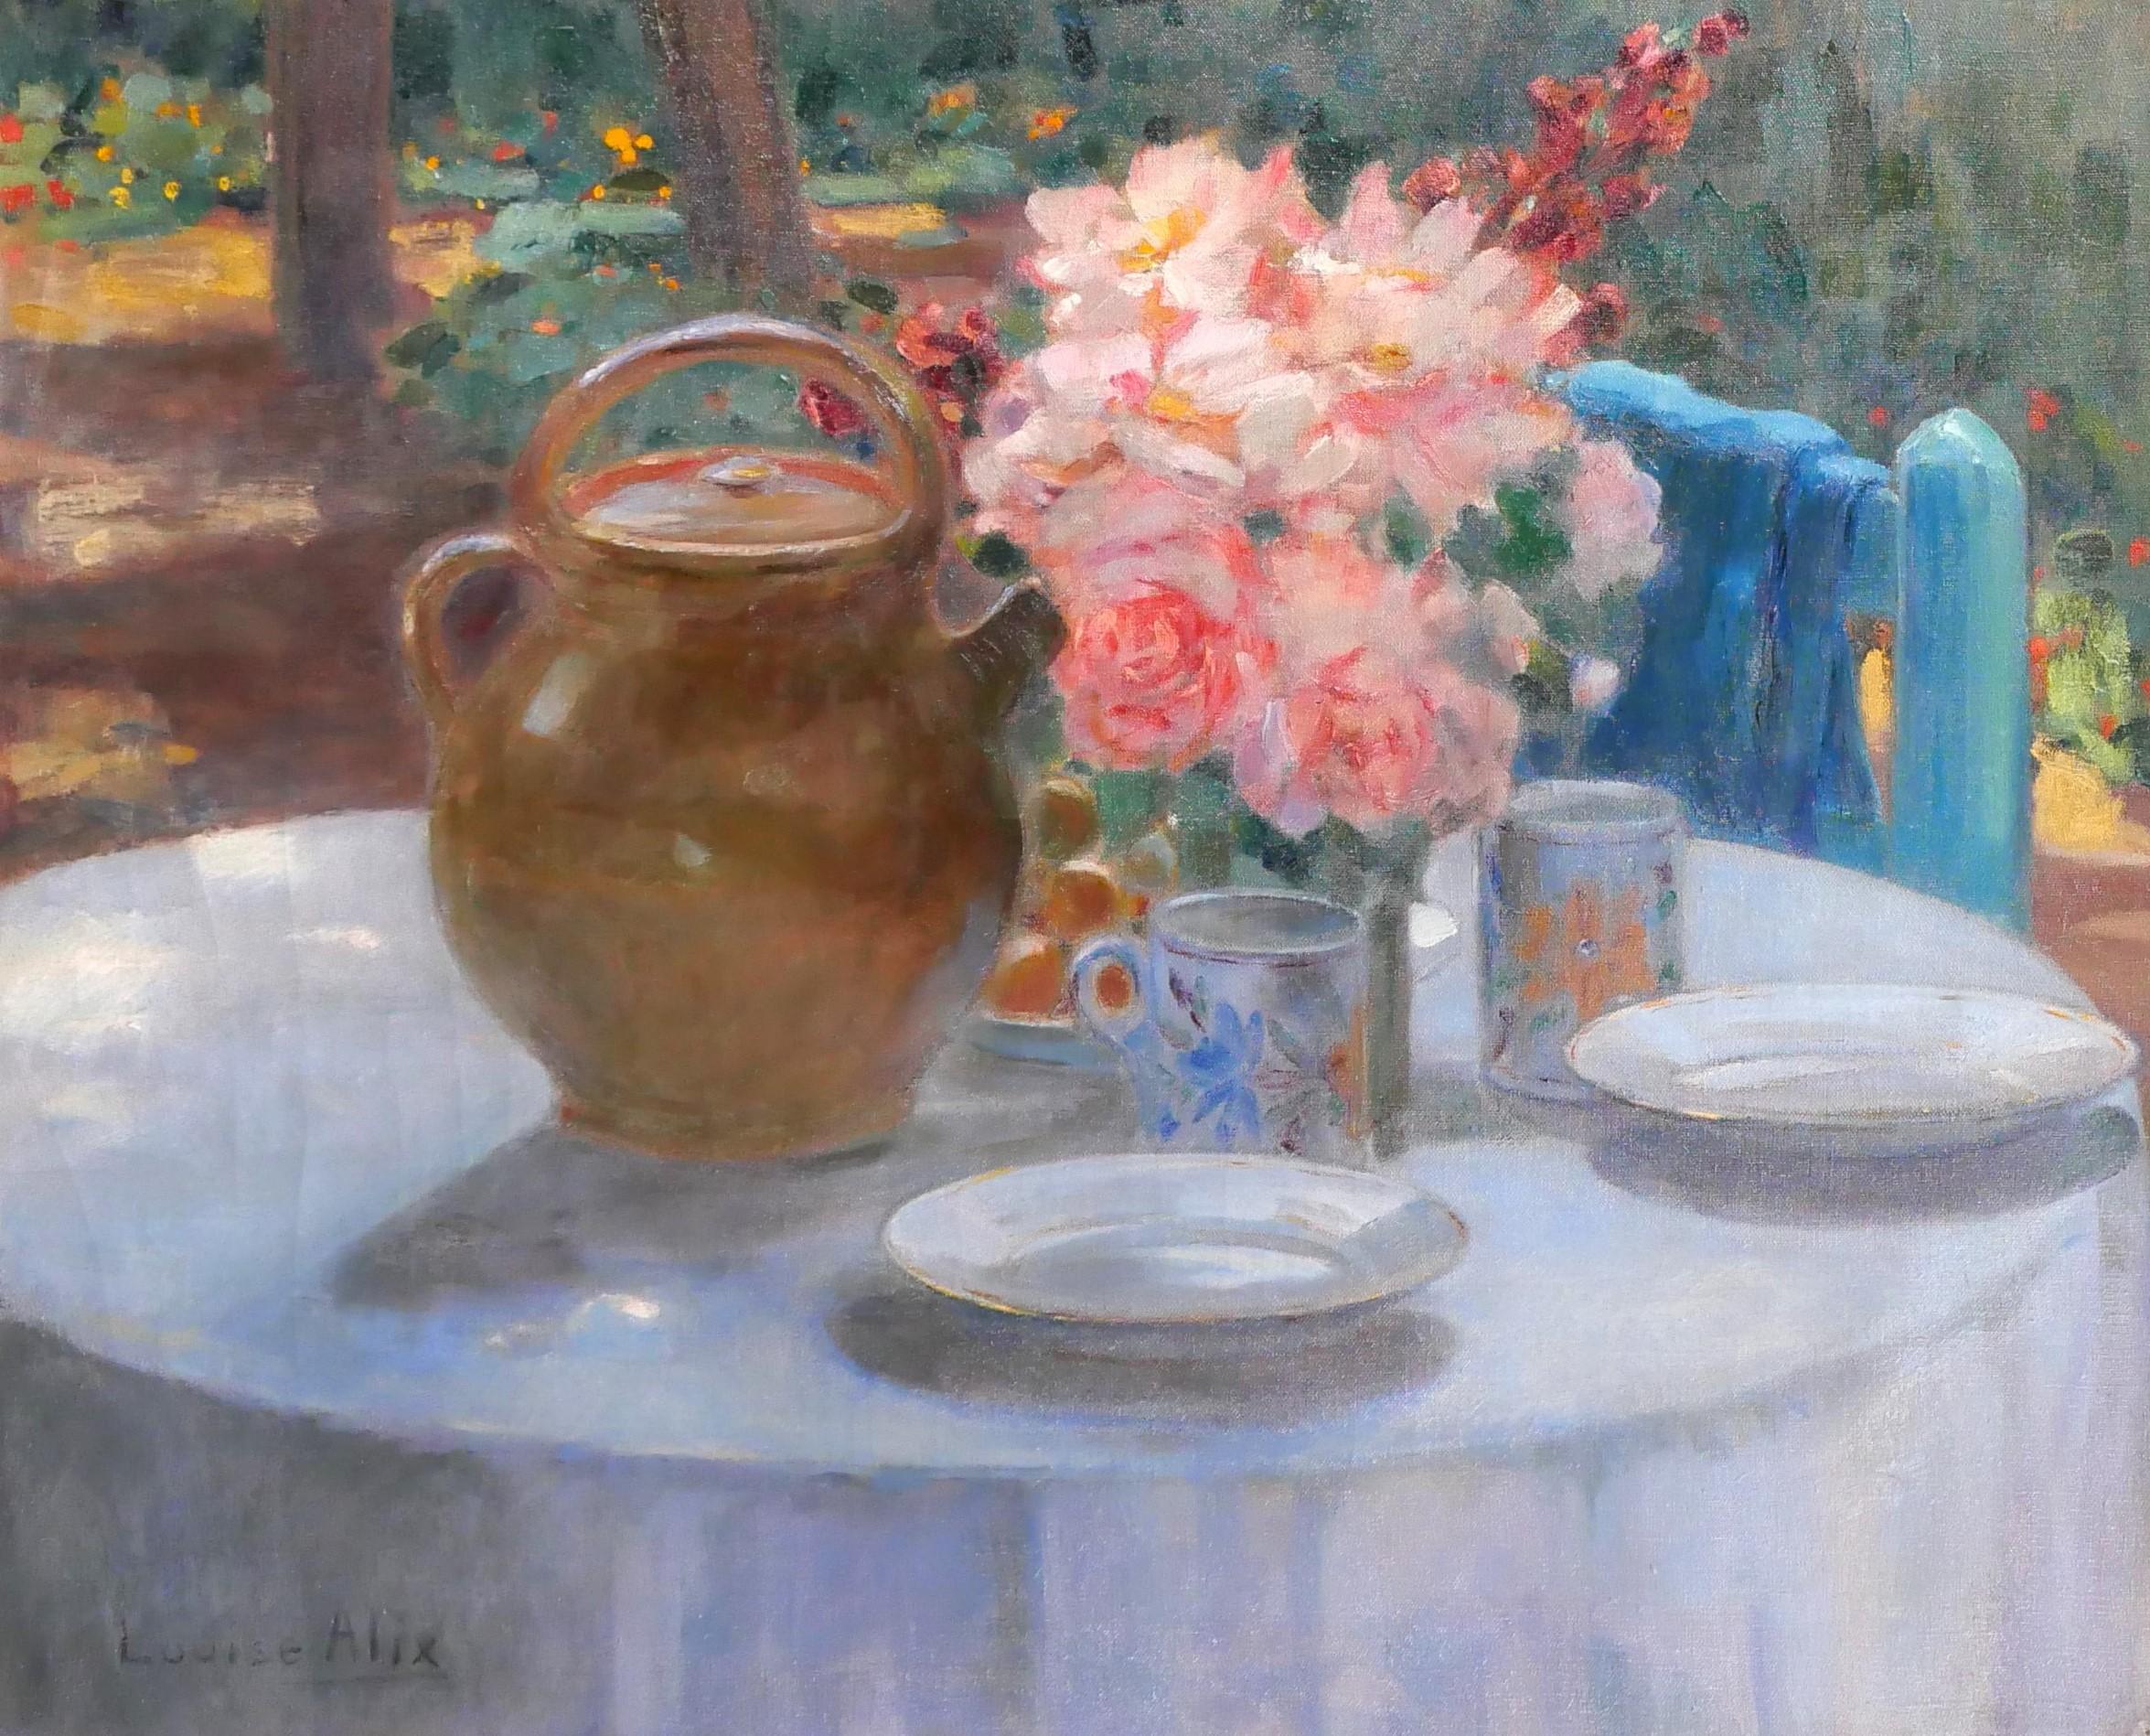 The table in the garden, flowers at tea time